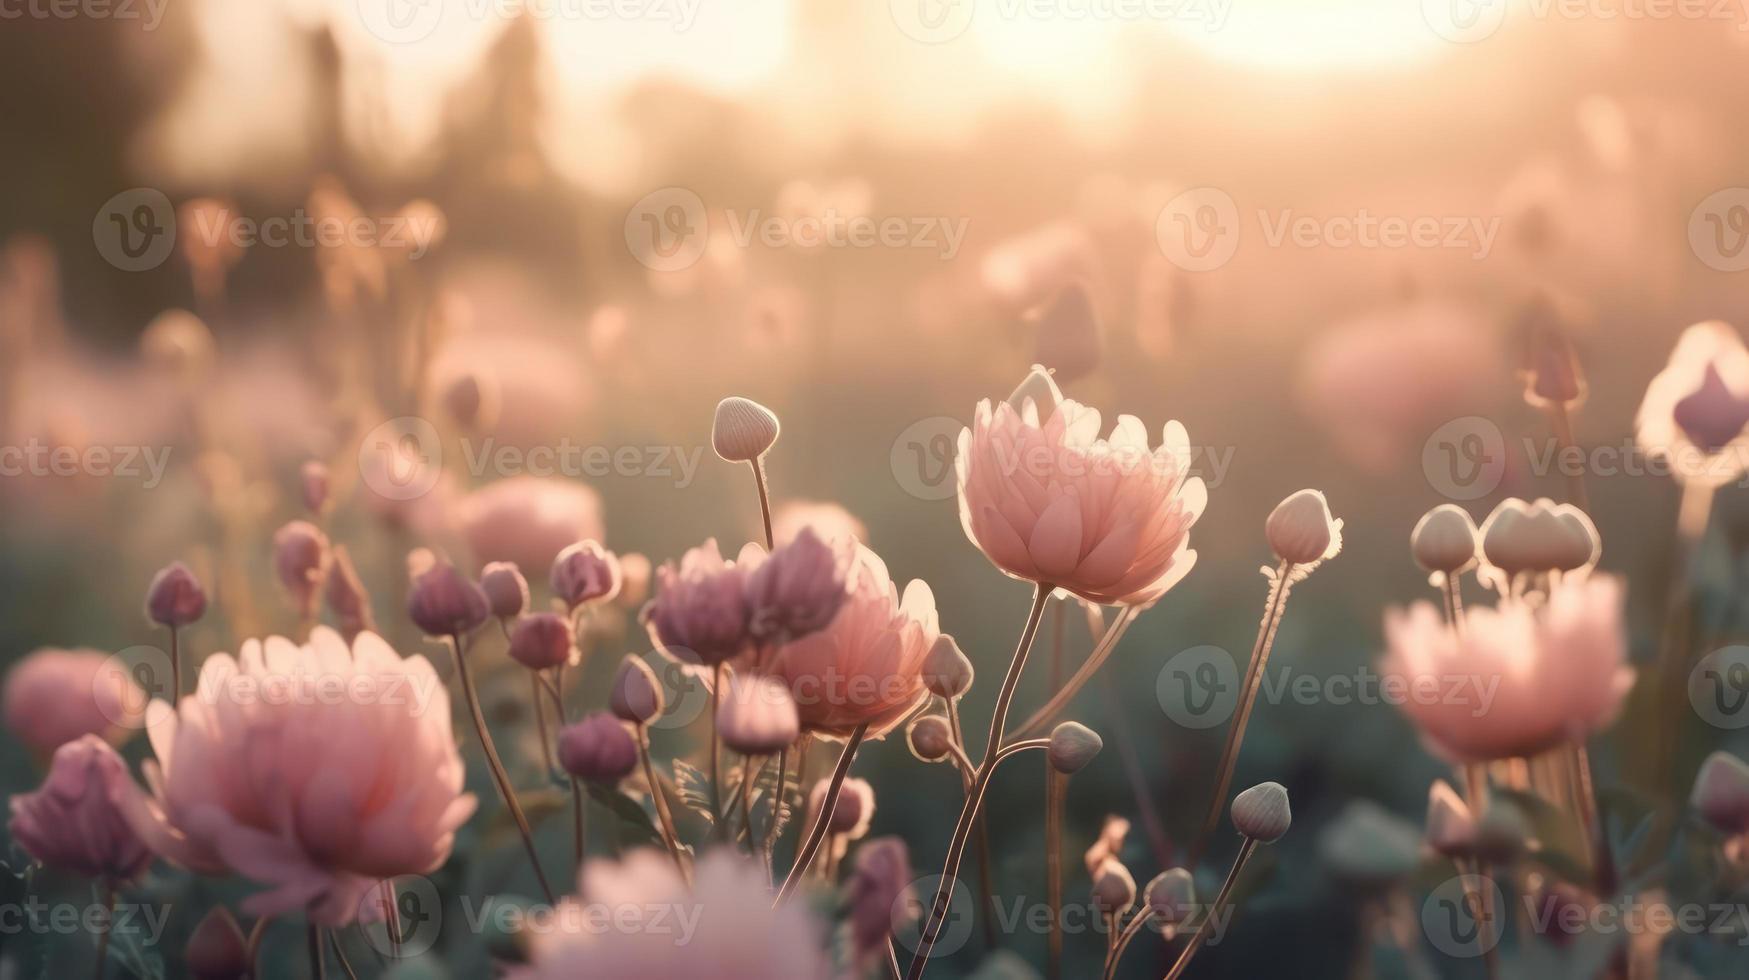 Soft dreamy sweet flower for love romance background. photo